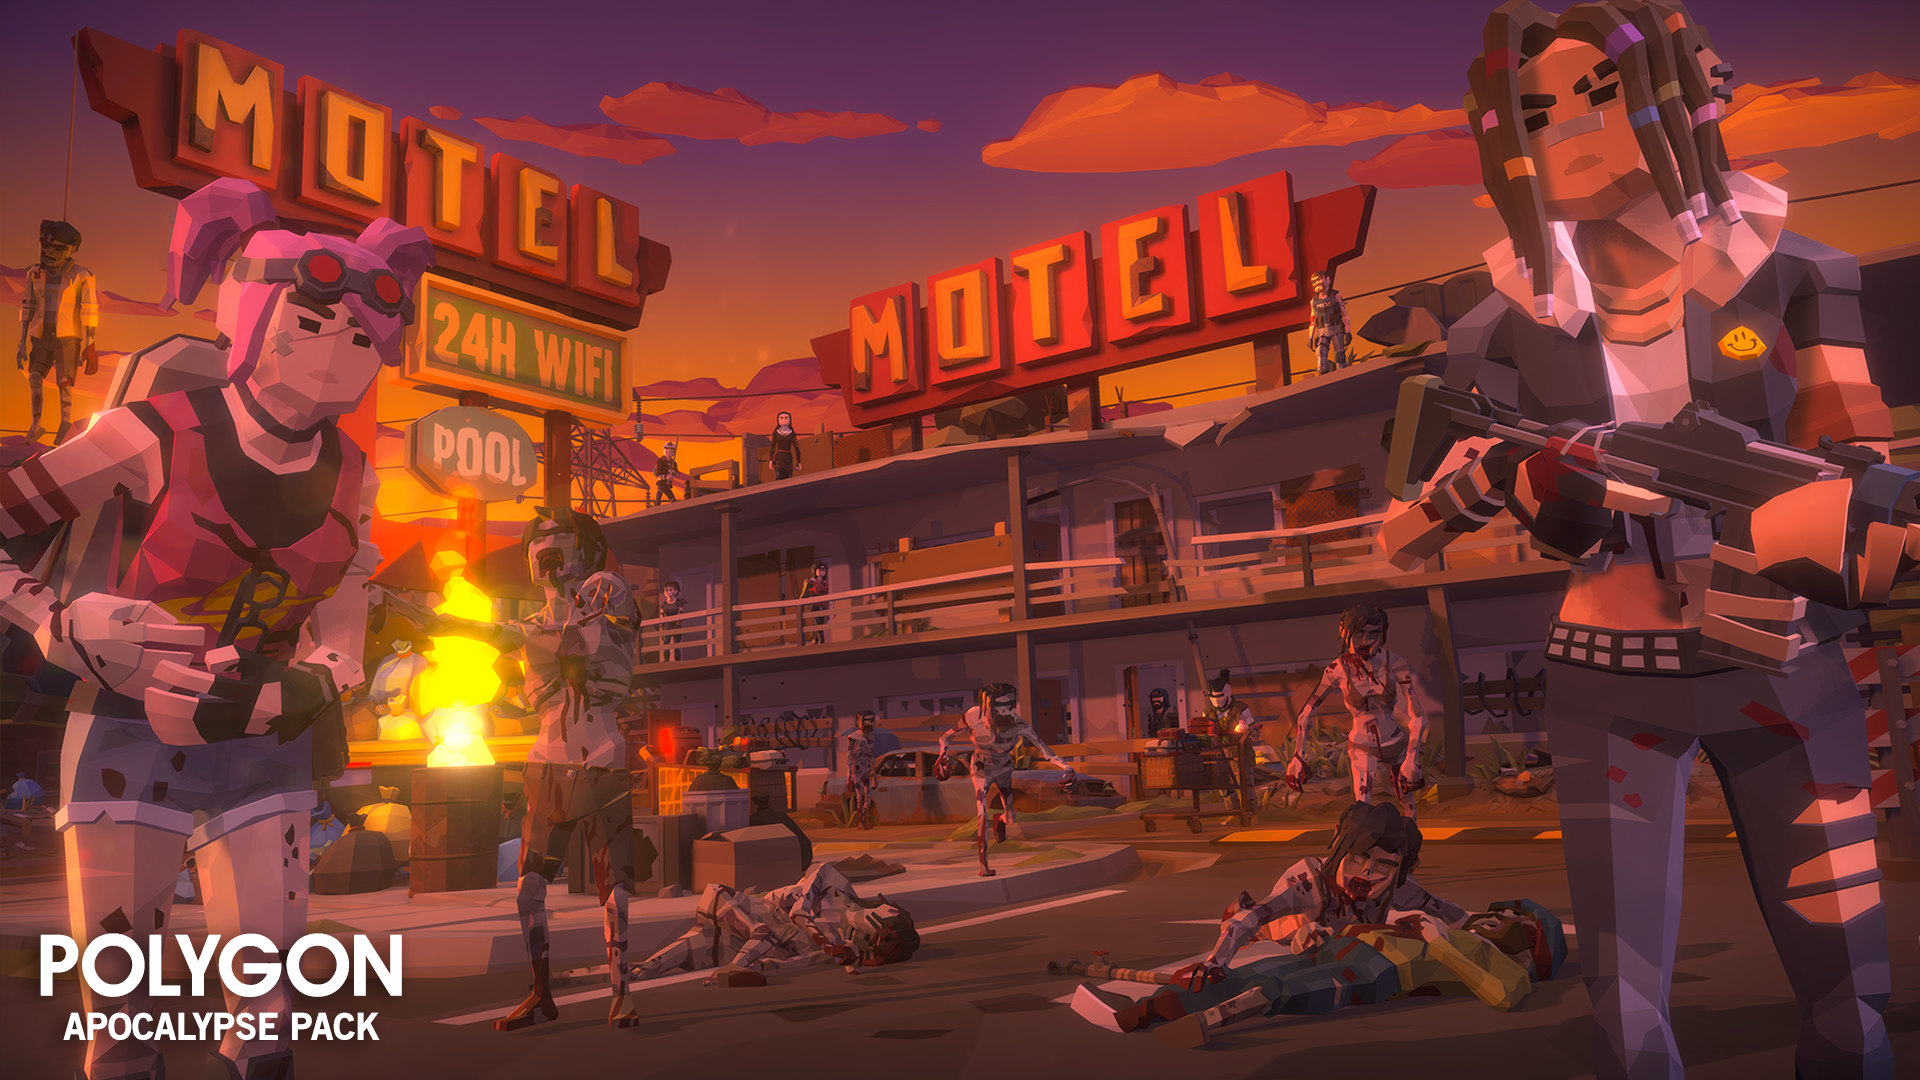 Two low poly female characters standing in front of a motel with zombies approaching them